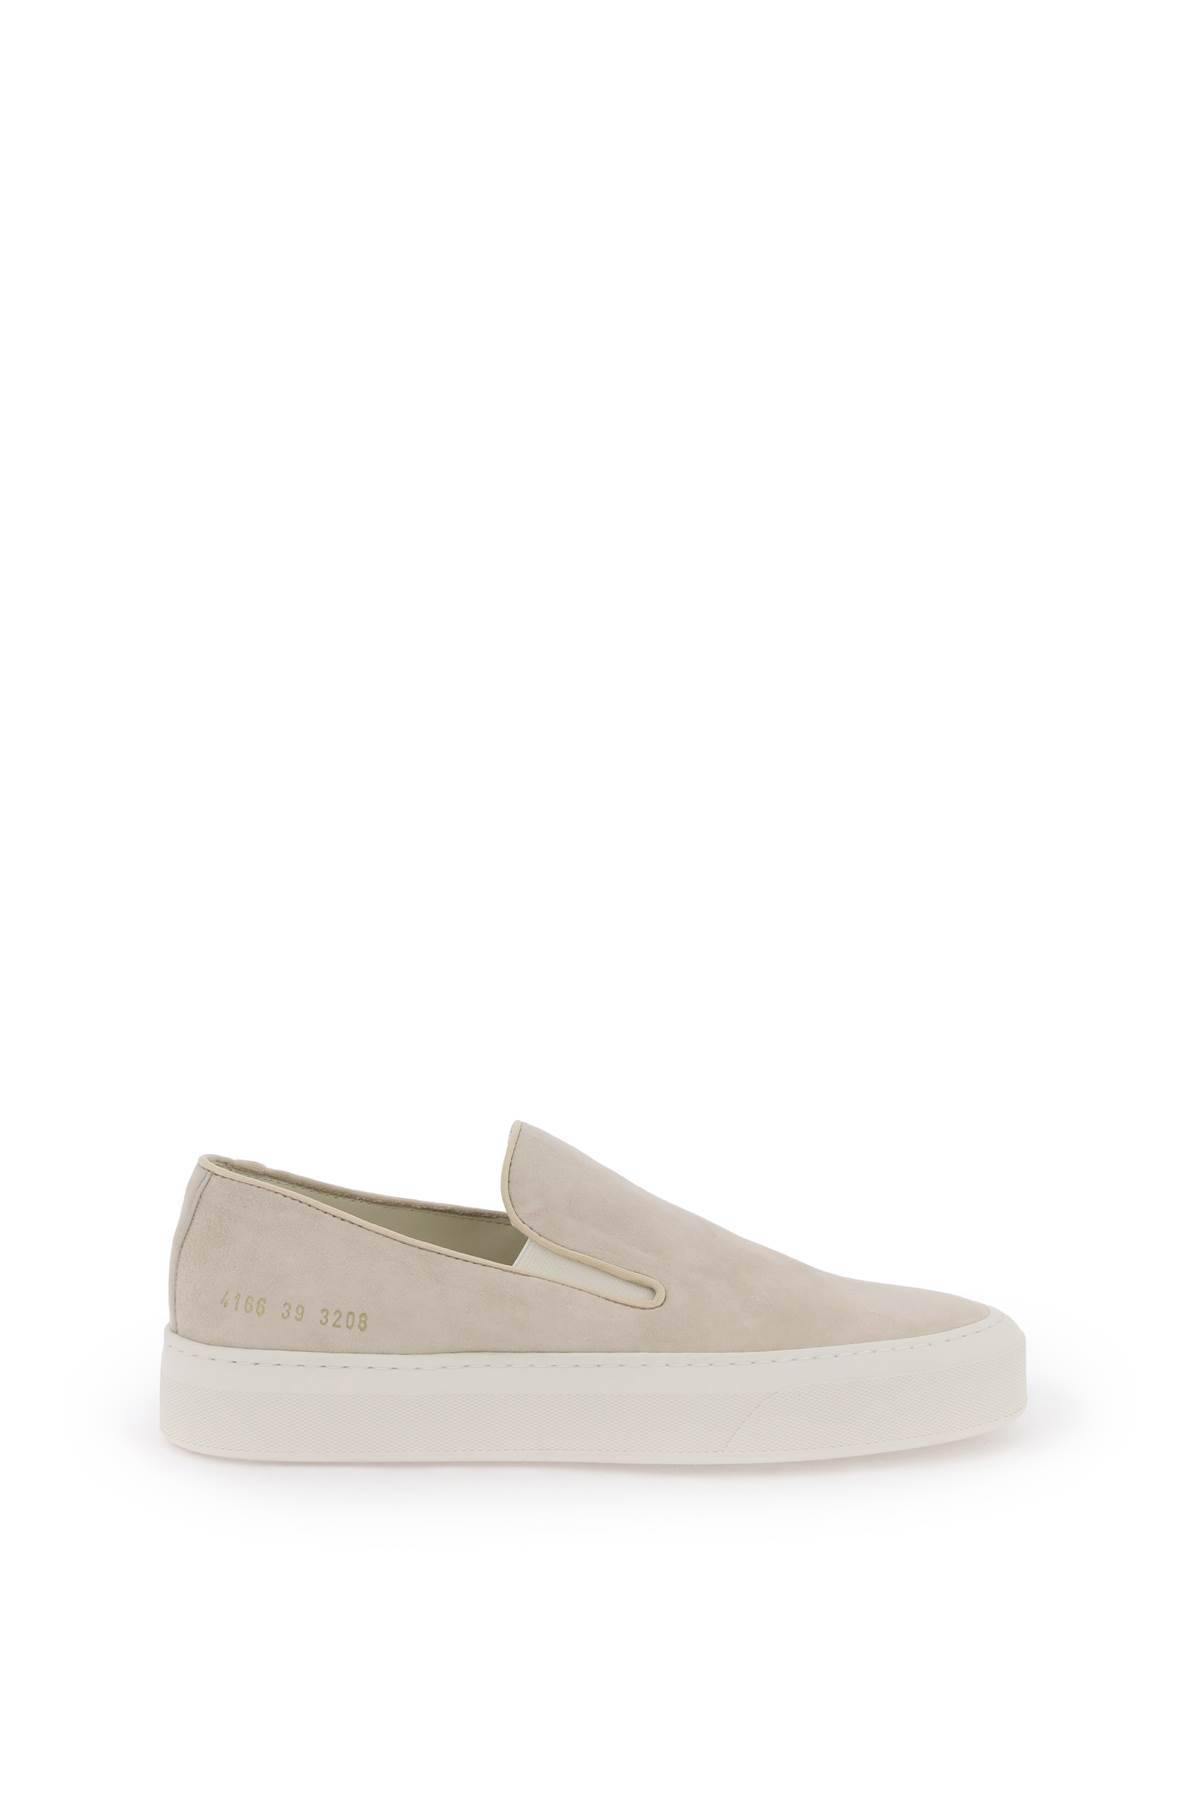 COMMON PROJECTS COMMON PROJECTS slip-on sneakers